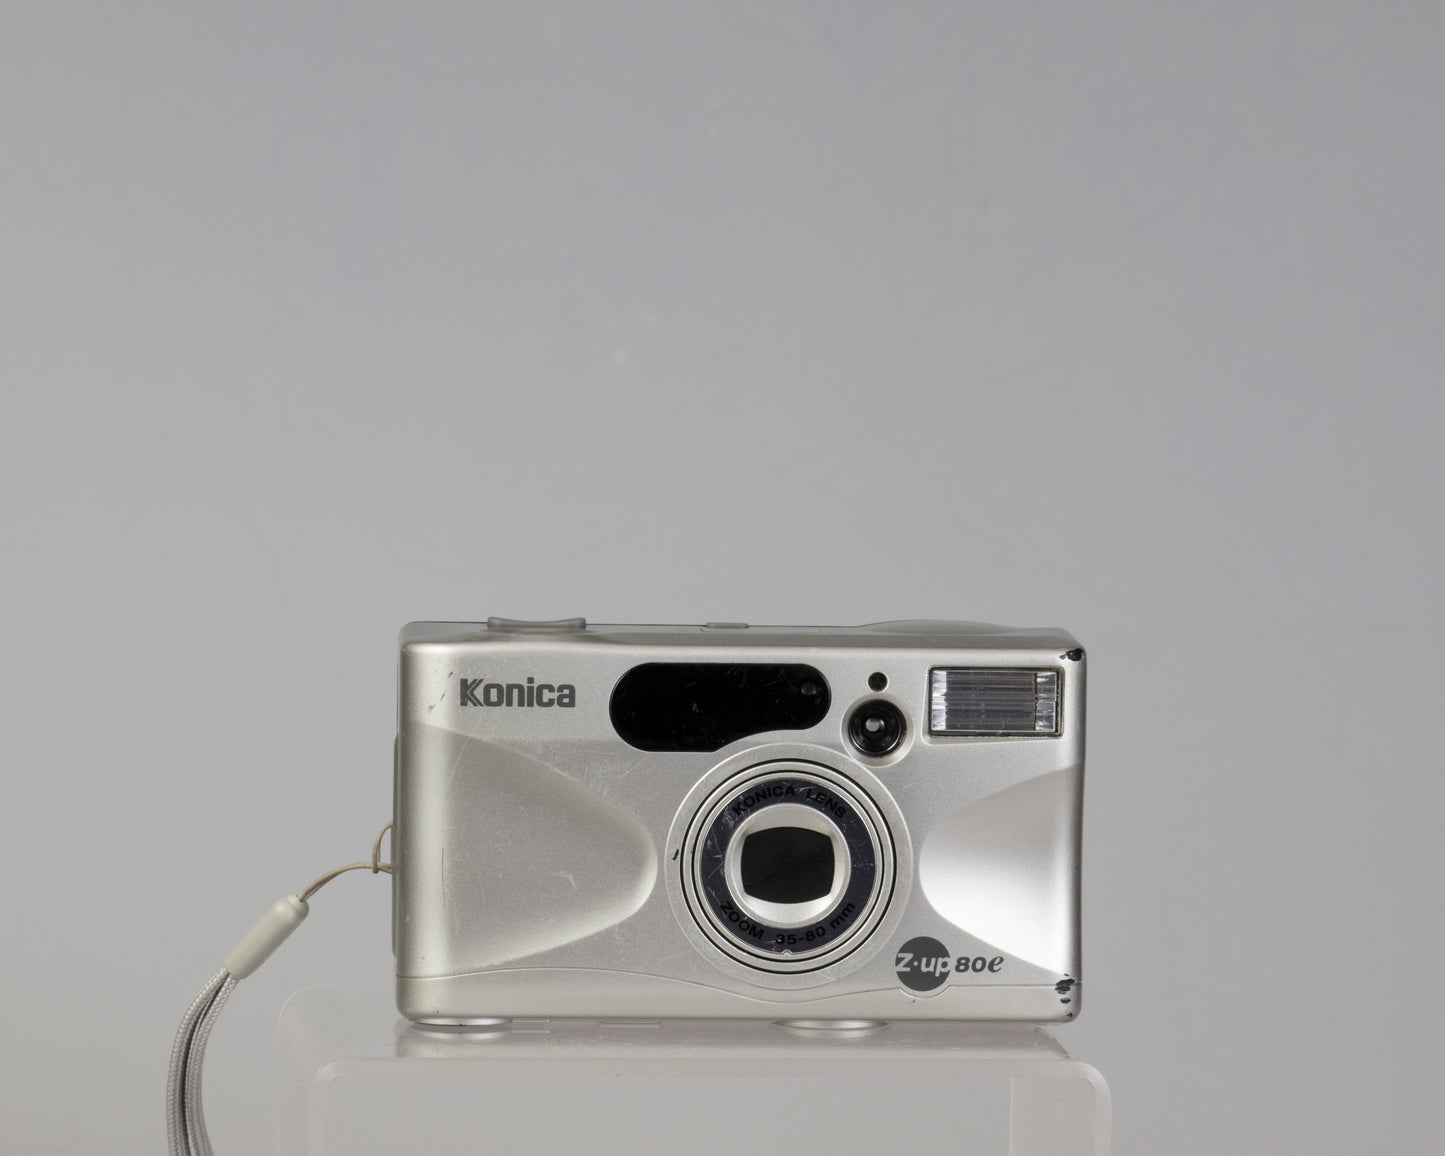 Konica Z-Up 80e 35mm point-and-shoot camera